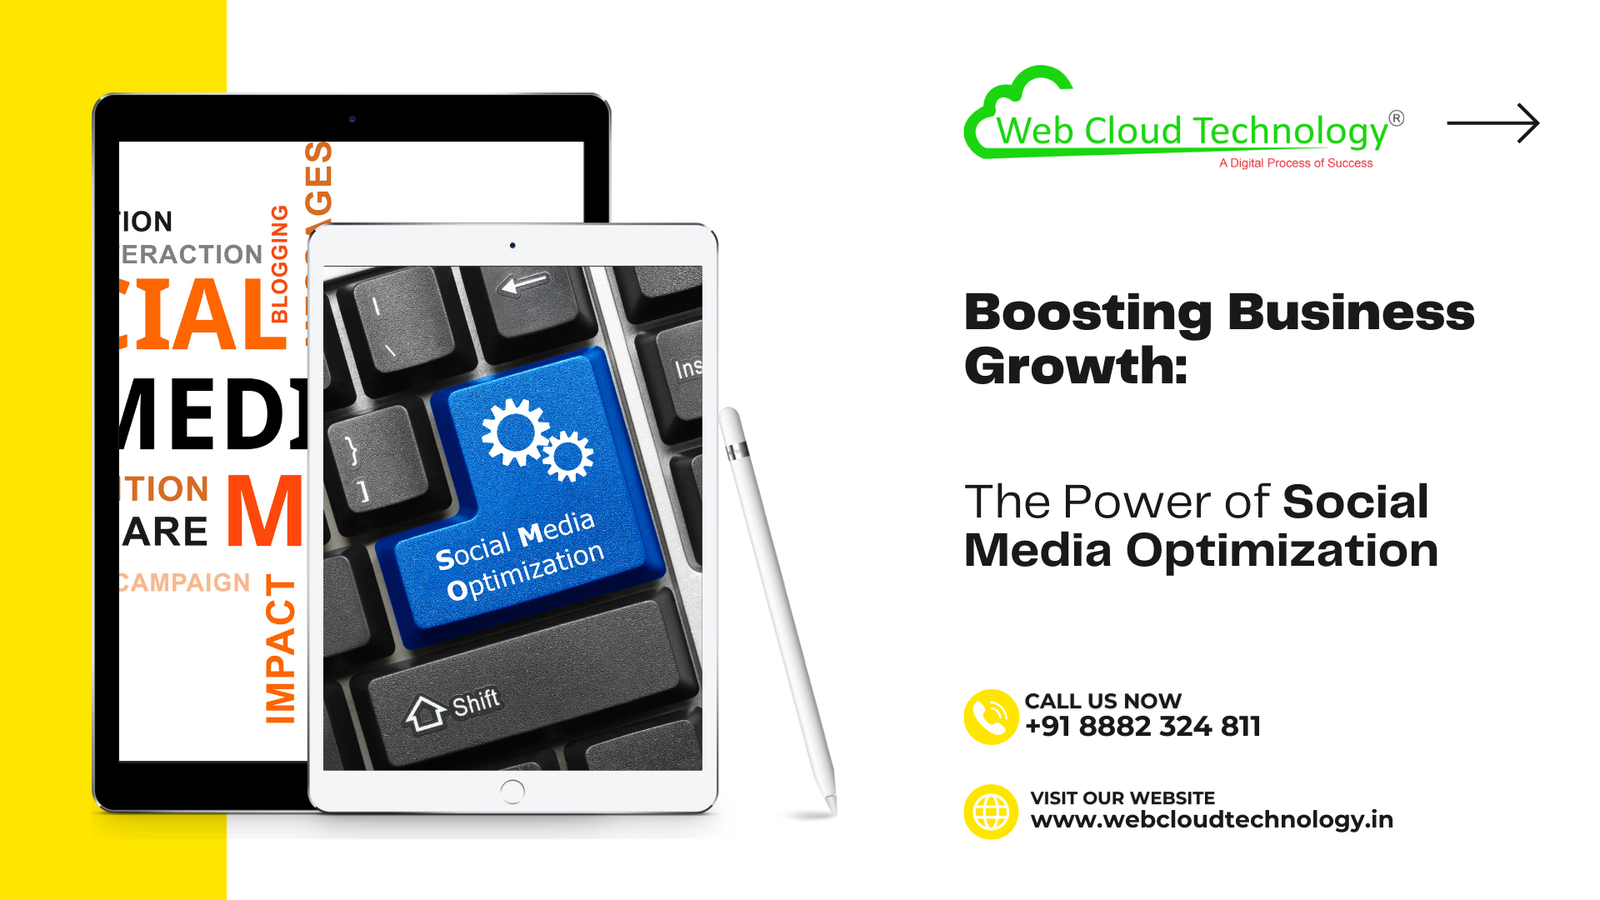 Boosting Business Growth: The Power of Social Media Optimization